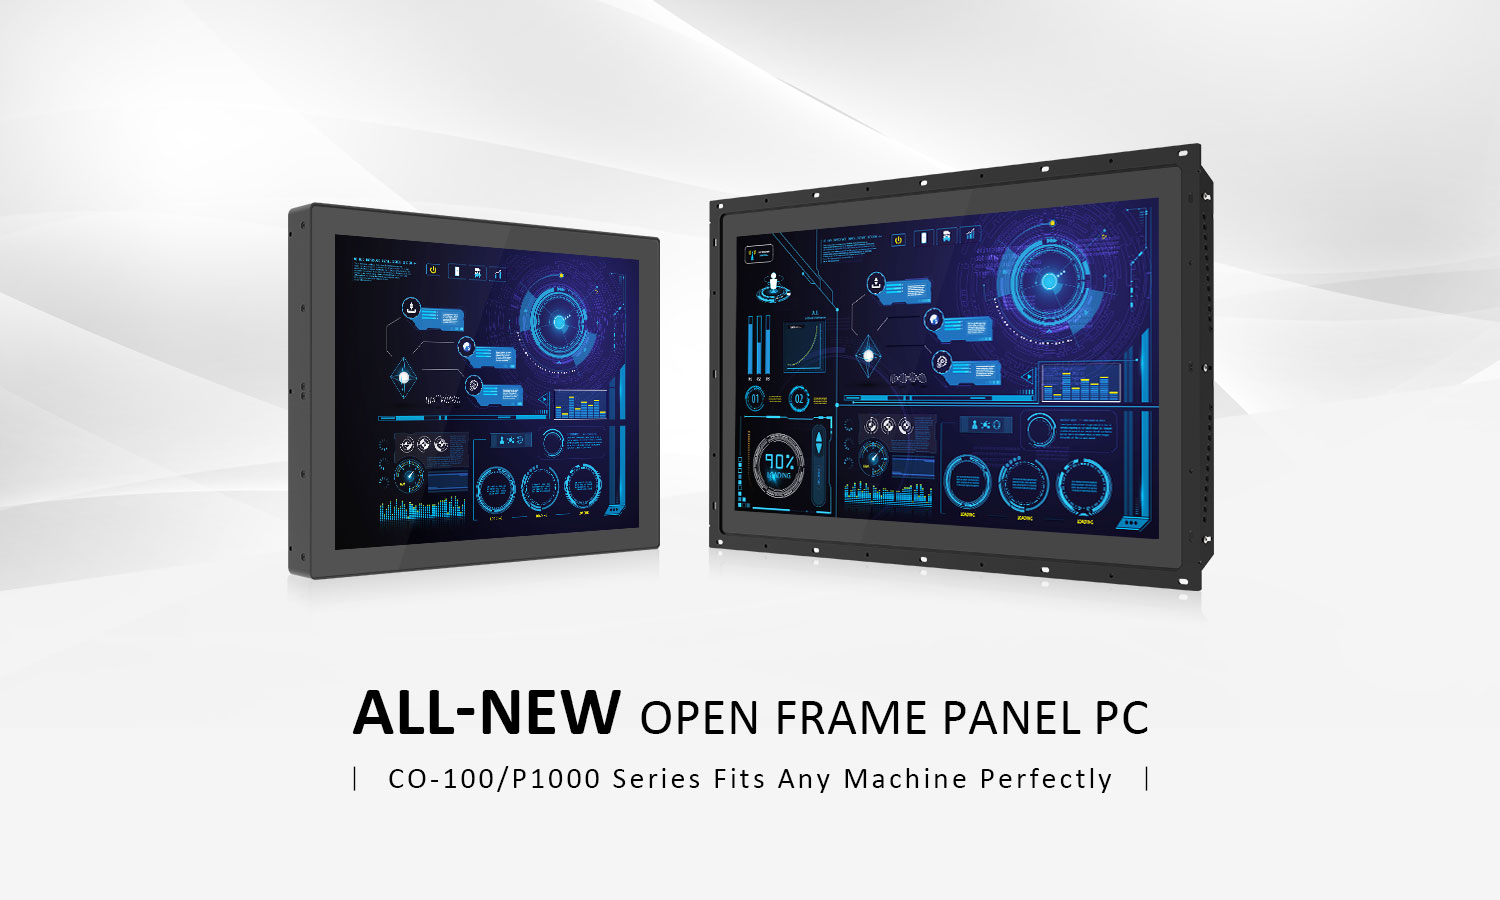 All new open frame panel pc - CO-100/P1101 Series Fits Any Machine Perfectly